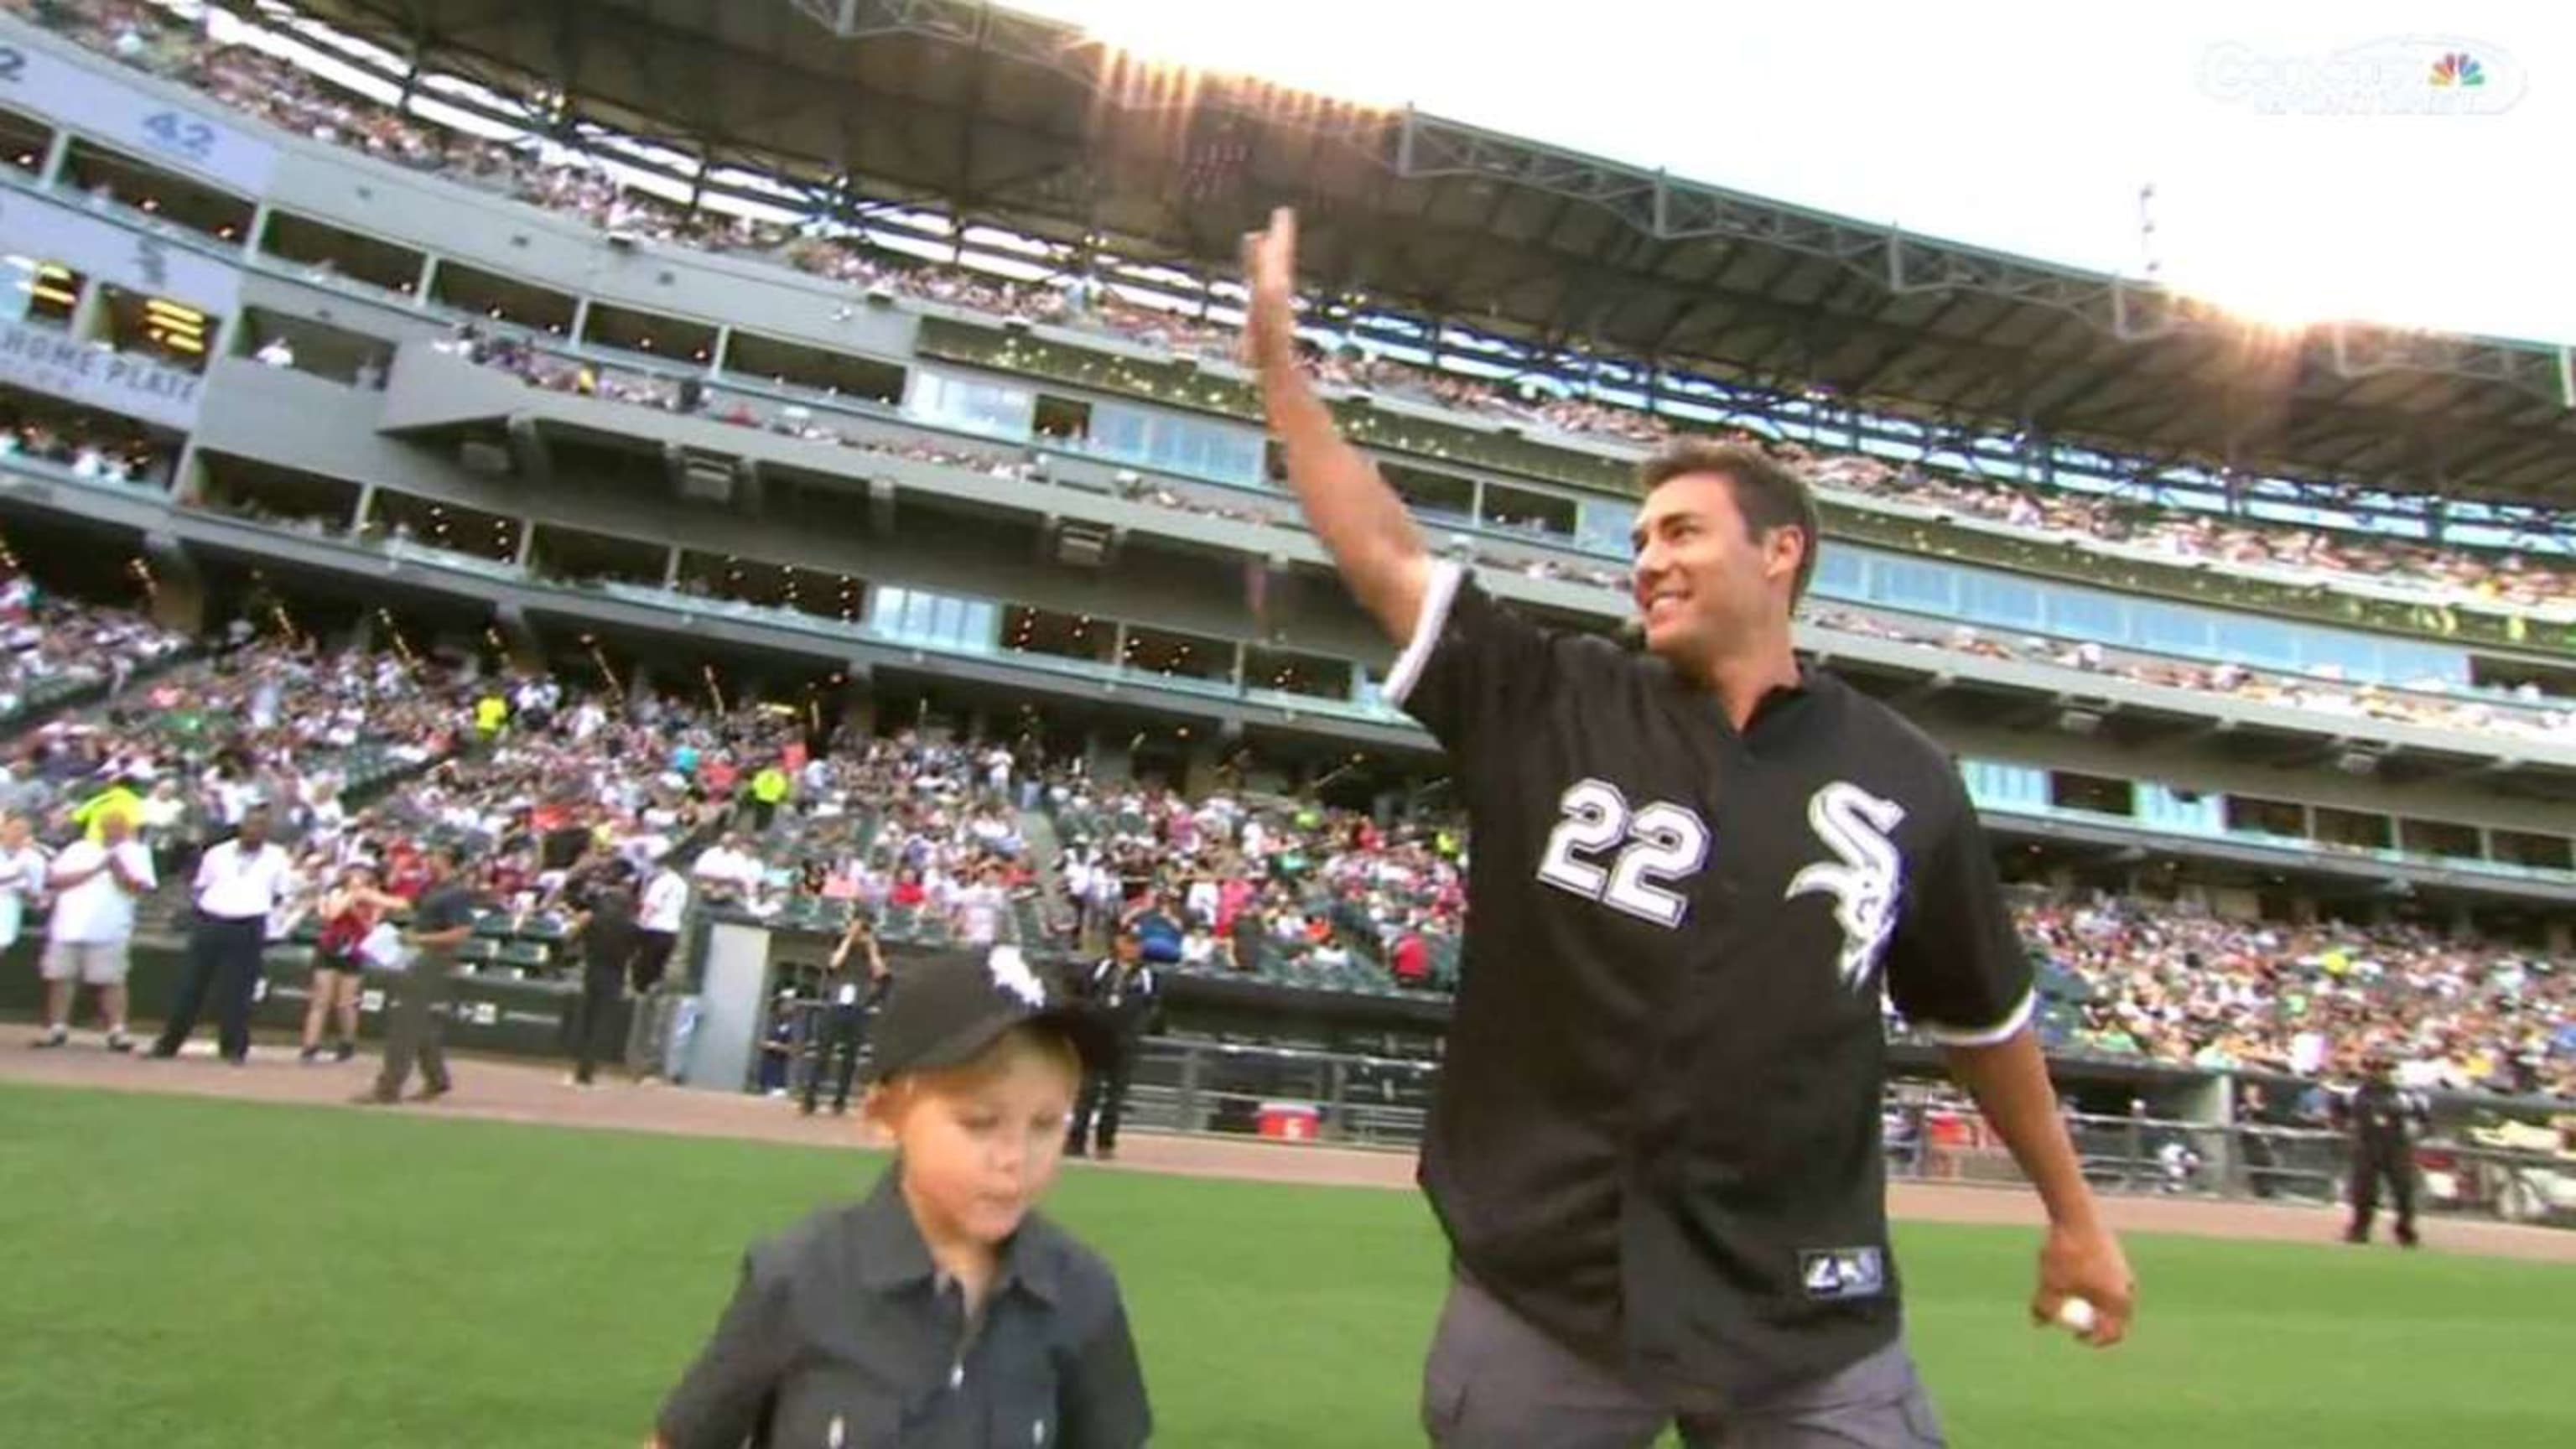 White Sox Q&A: Scott Podsednik. As part of an ongoing Instagram Stories…, by Chicago White Sox